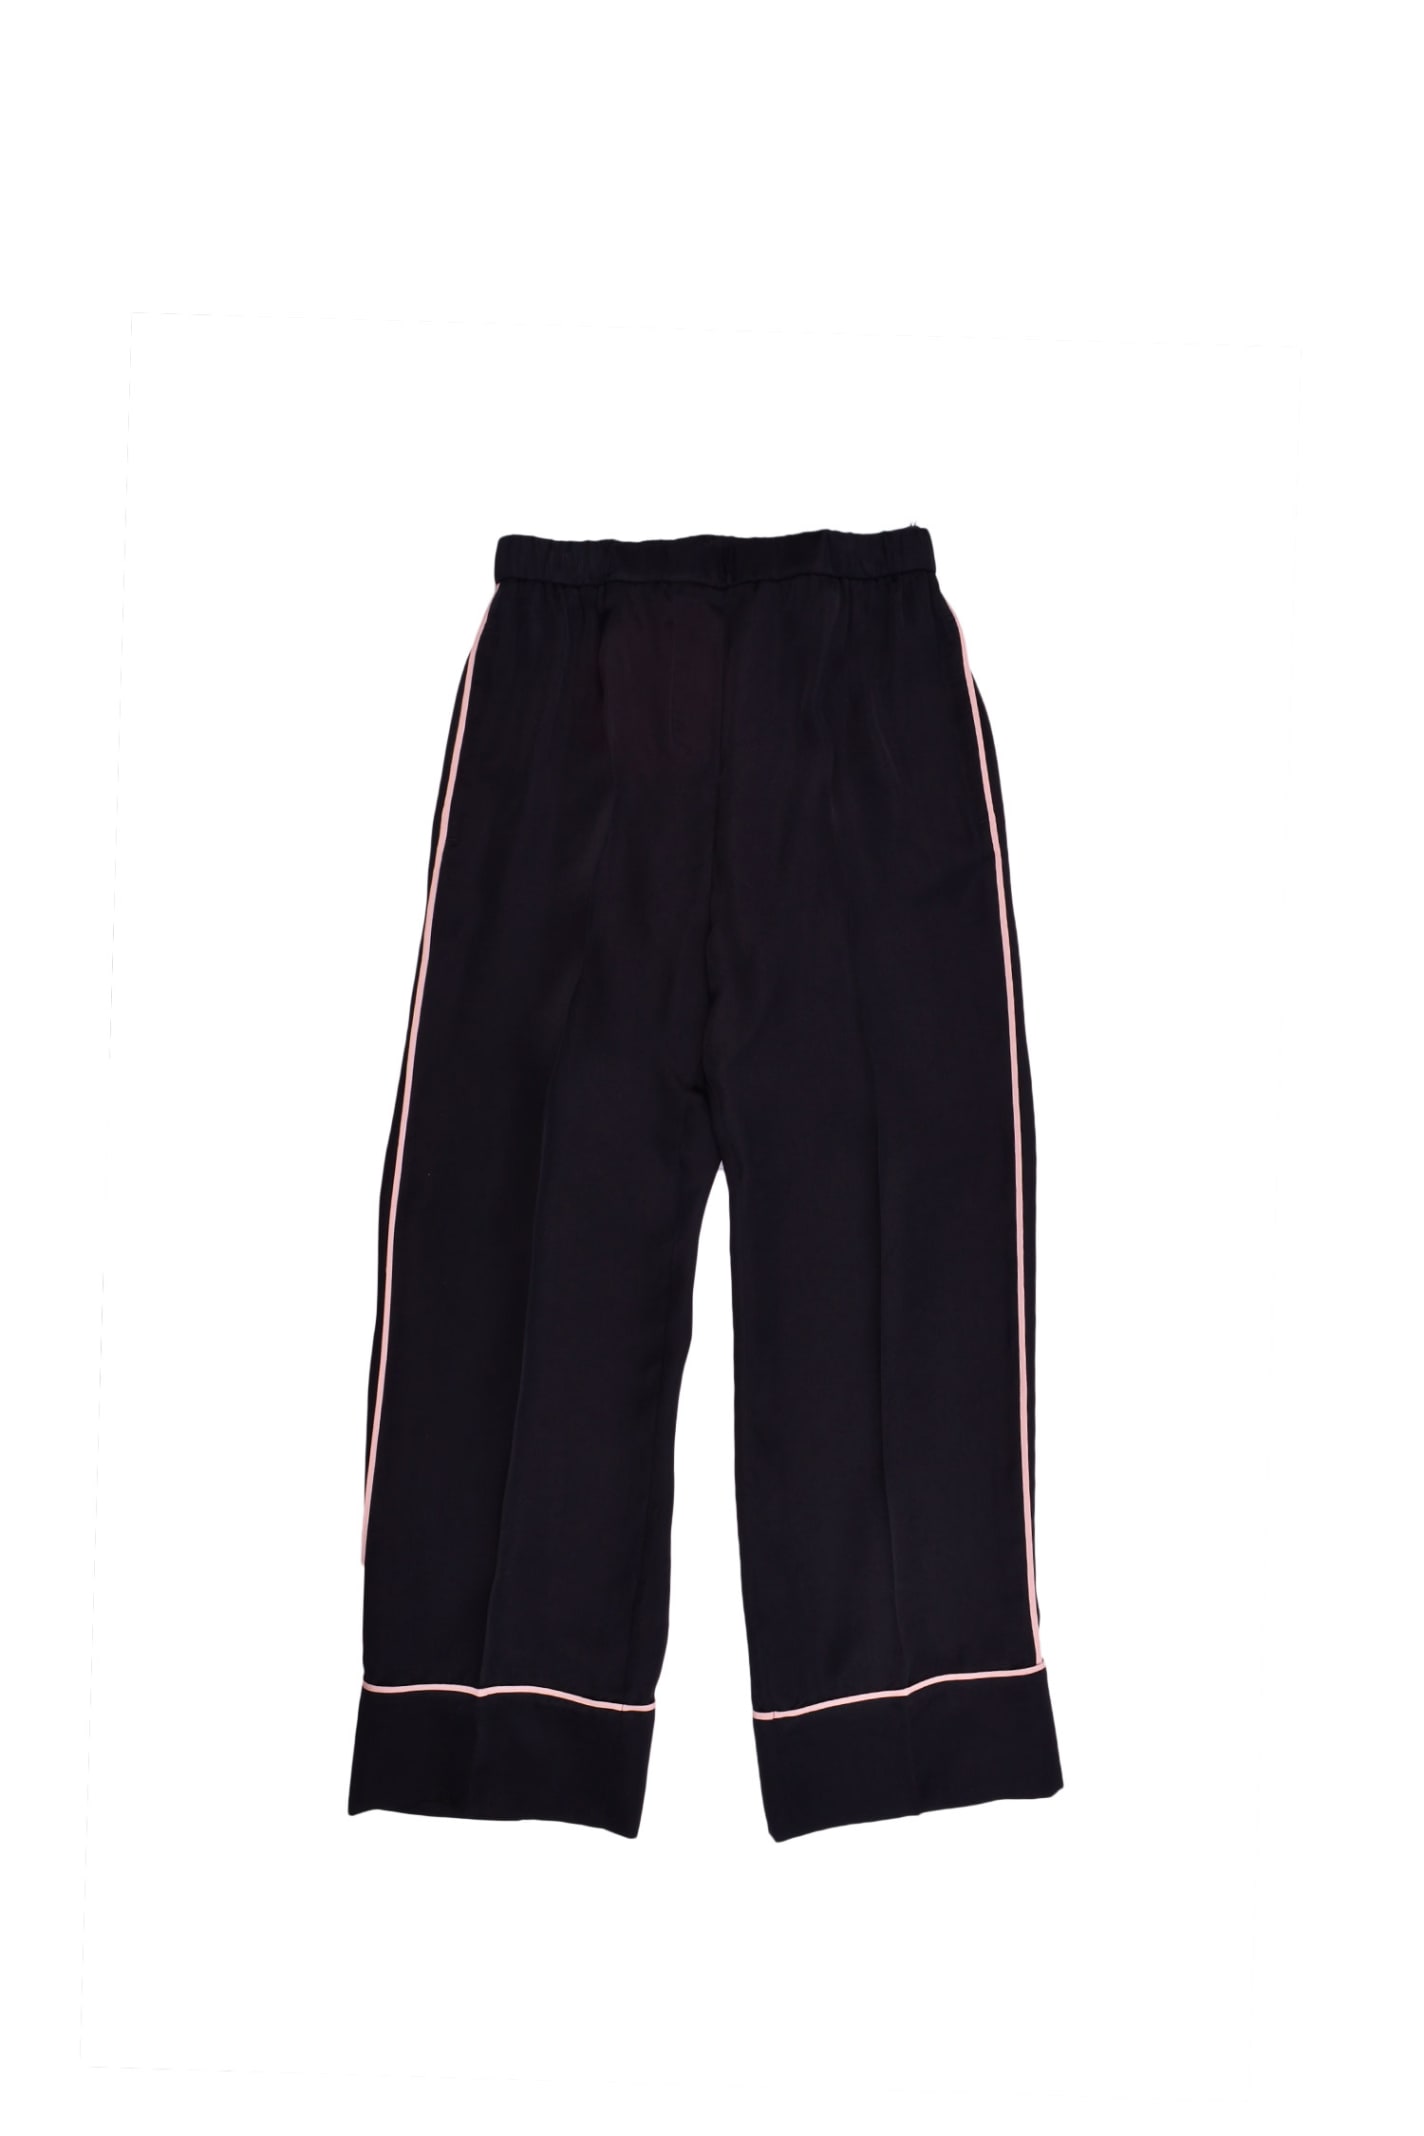 N.21 Cropped Straight-leg Trousers